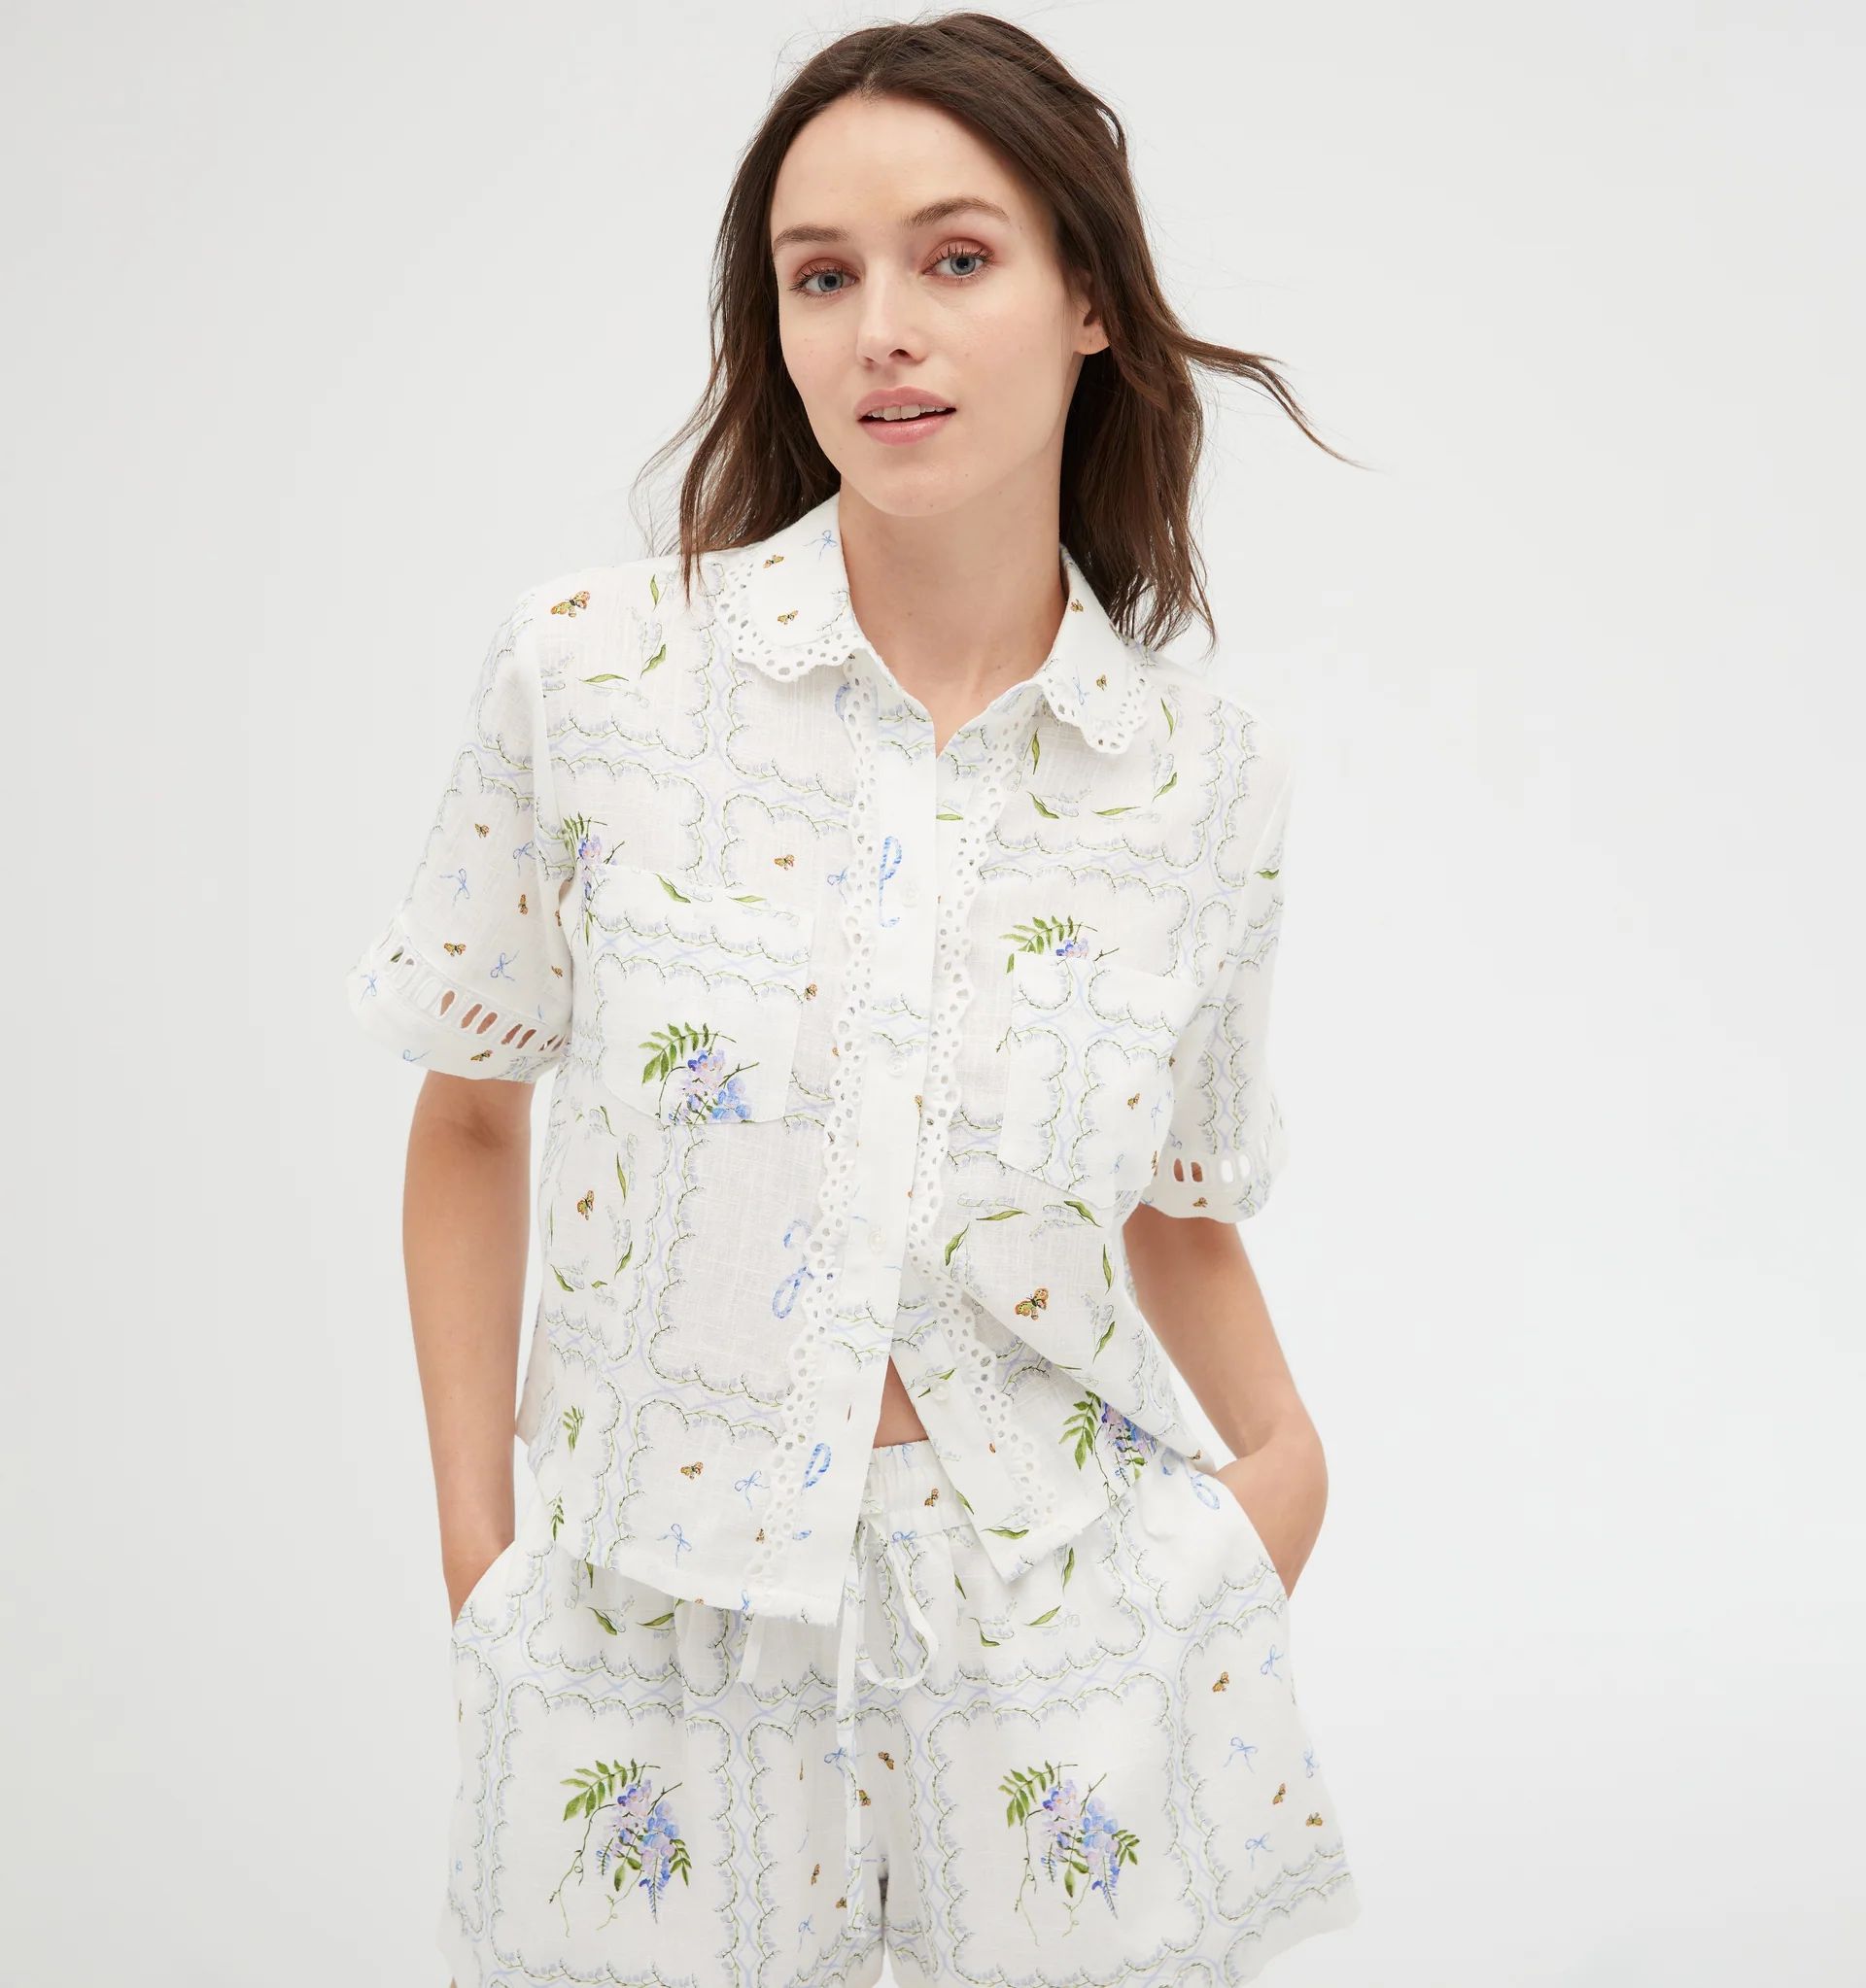 The Annette Top - White Floral Patchwork | Hill House Home